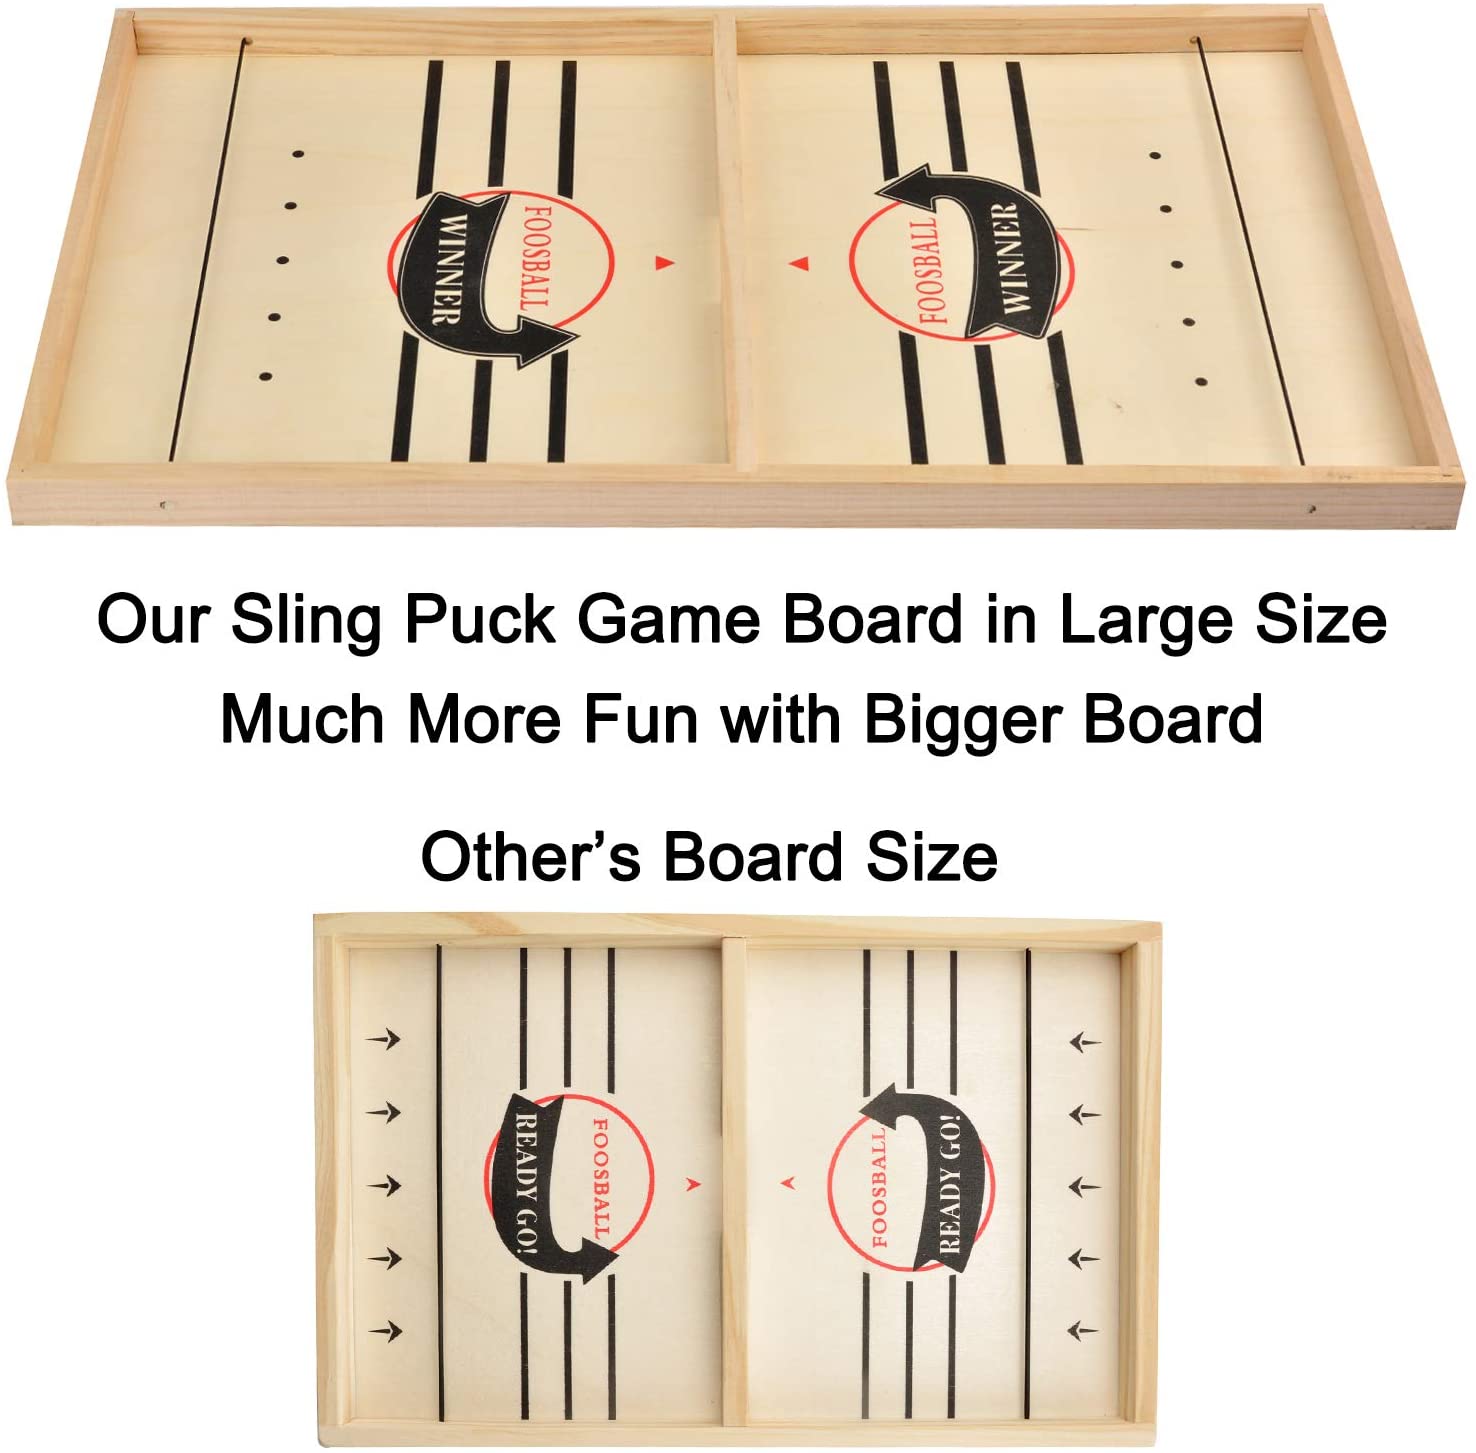 DTJTOOY Large Size Slingshot Board Game Fast Sling Puck Game Family Board Games Slingshot Board Games for Adults and Kids Foosball Board Game Ice Hockey Table Game Chess Board Games Battle - image 4 of 7